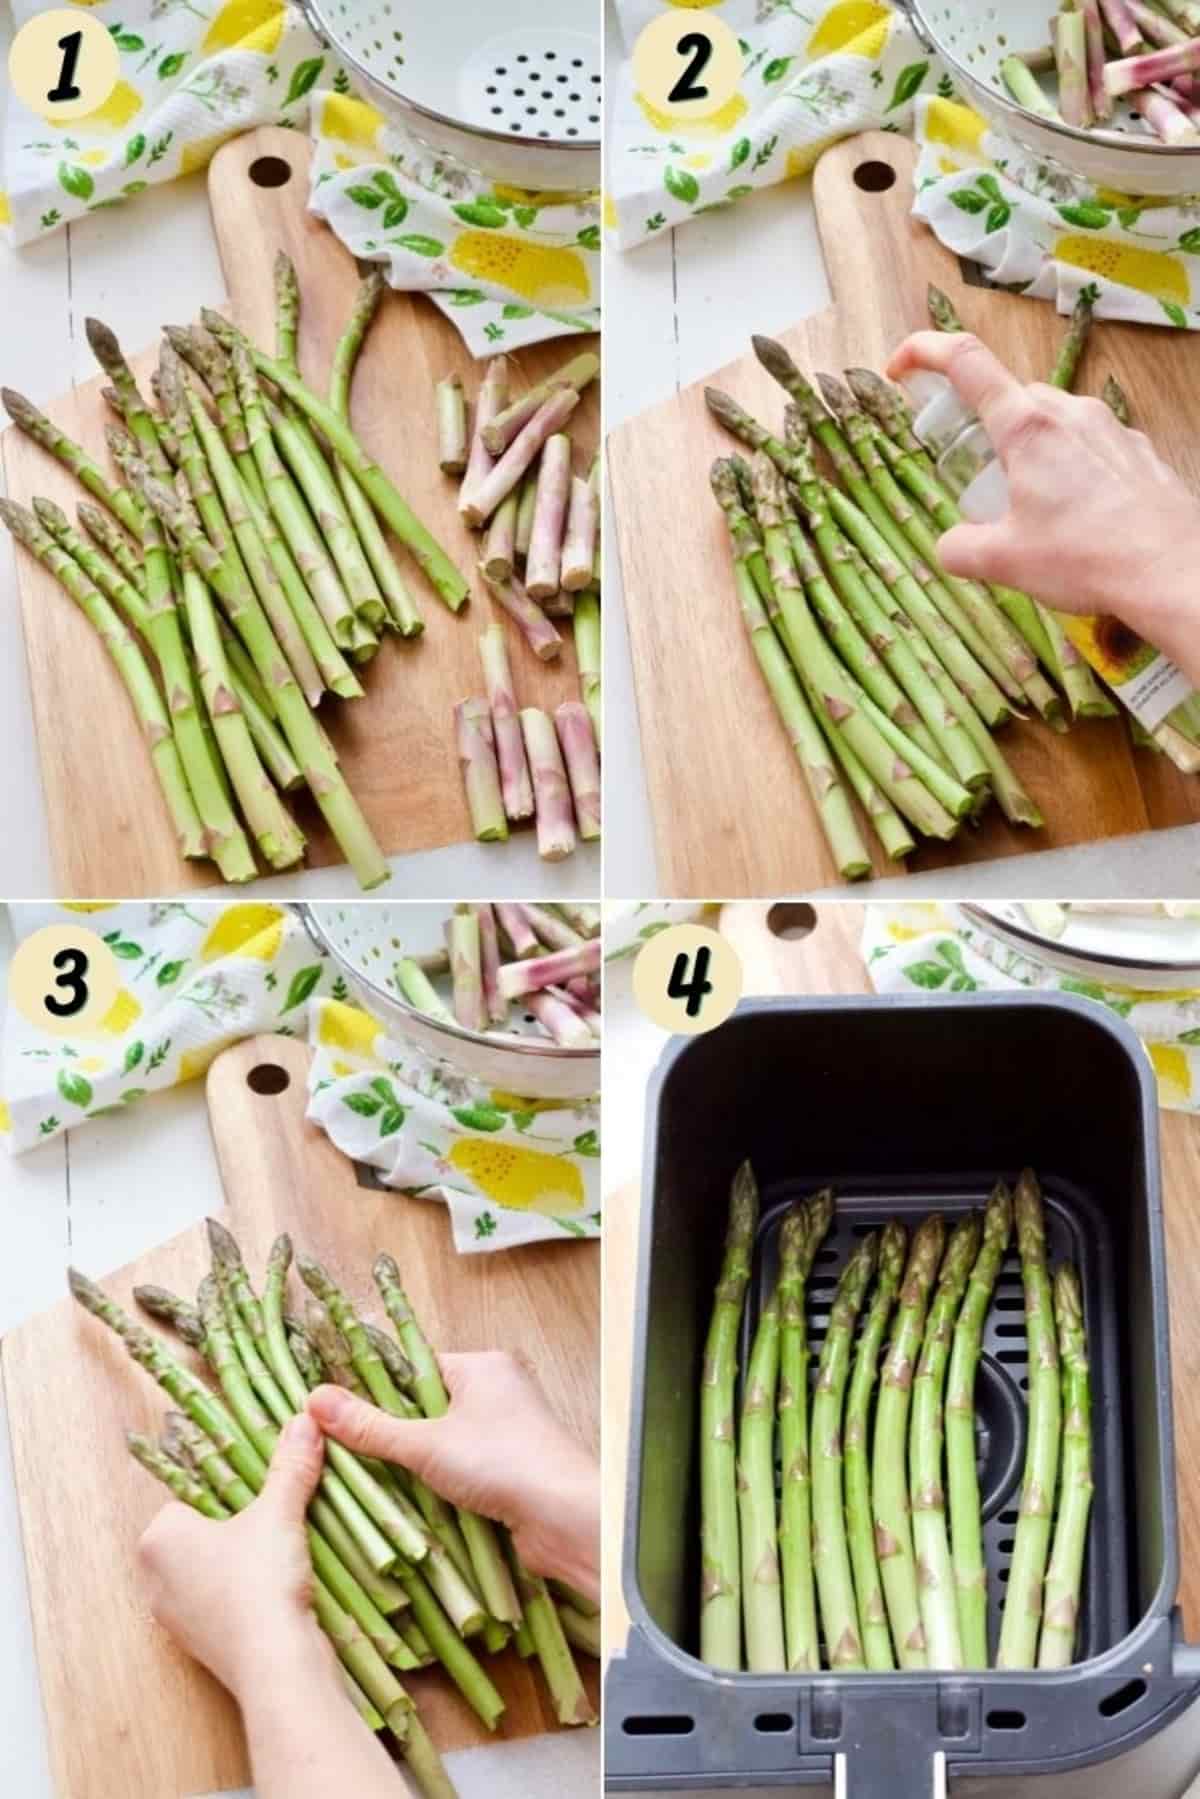 Asparagus being prepared for air frying.